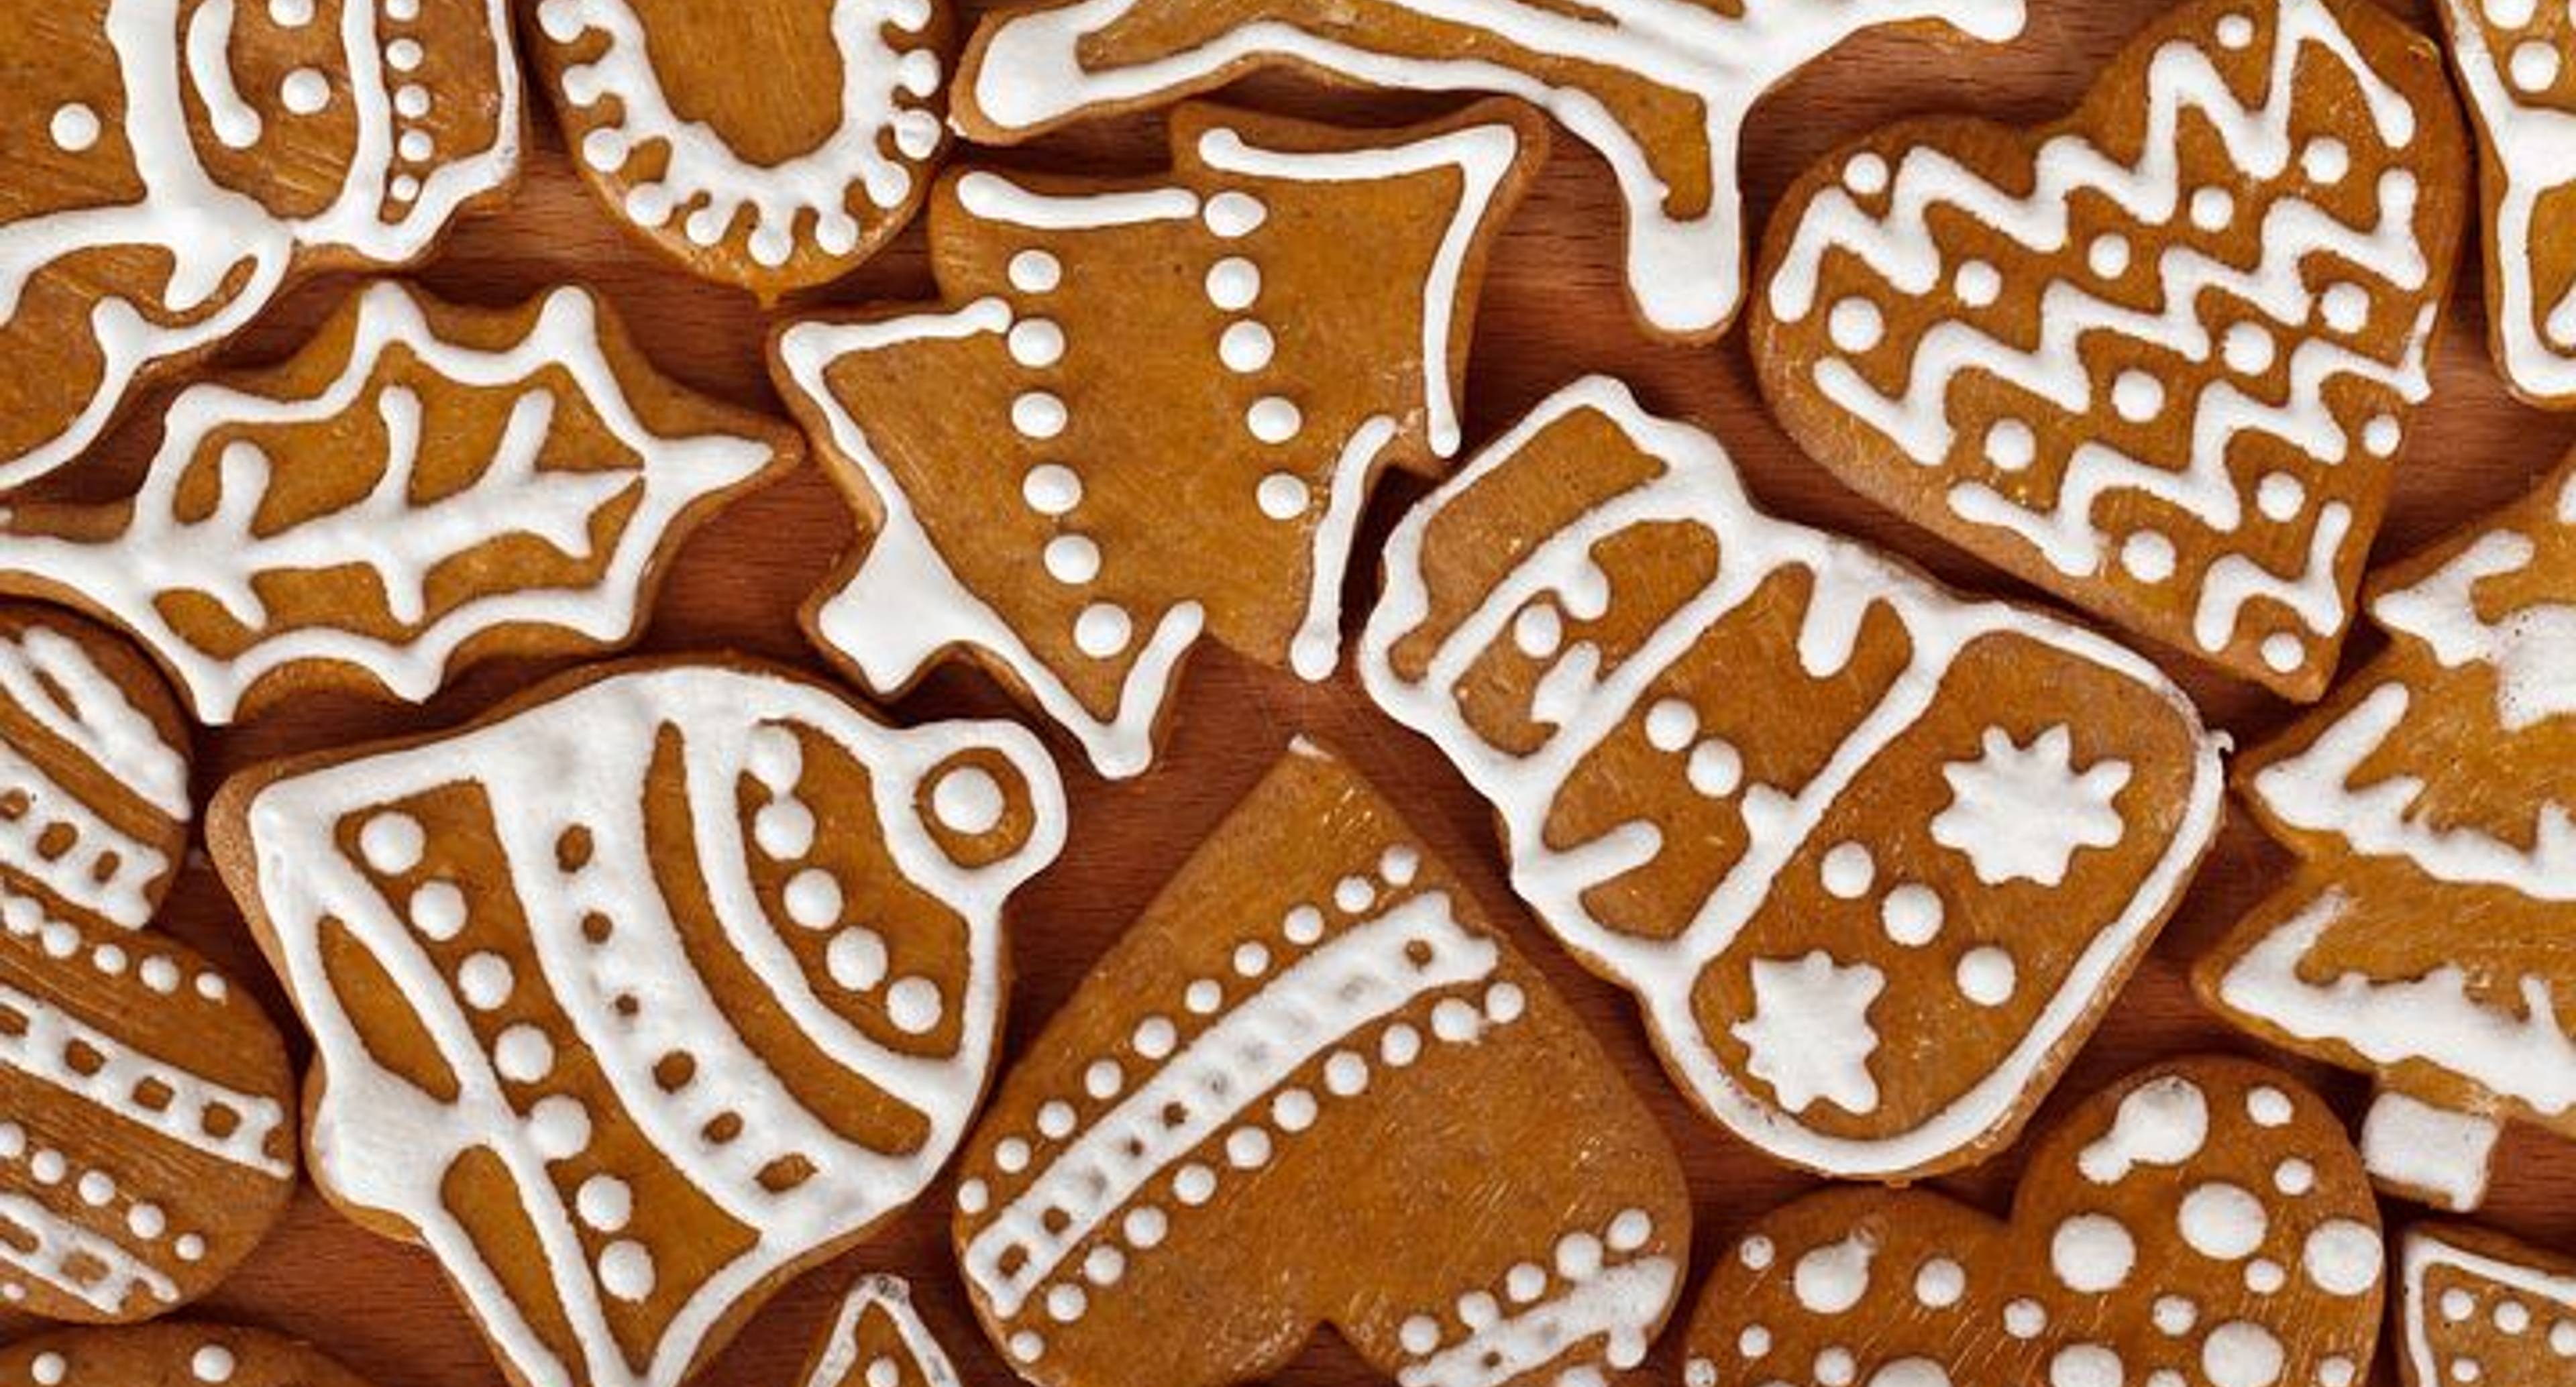 Oh, yes, the Tula gingerbread!